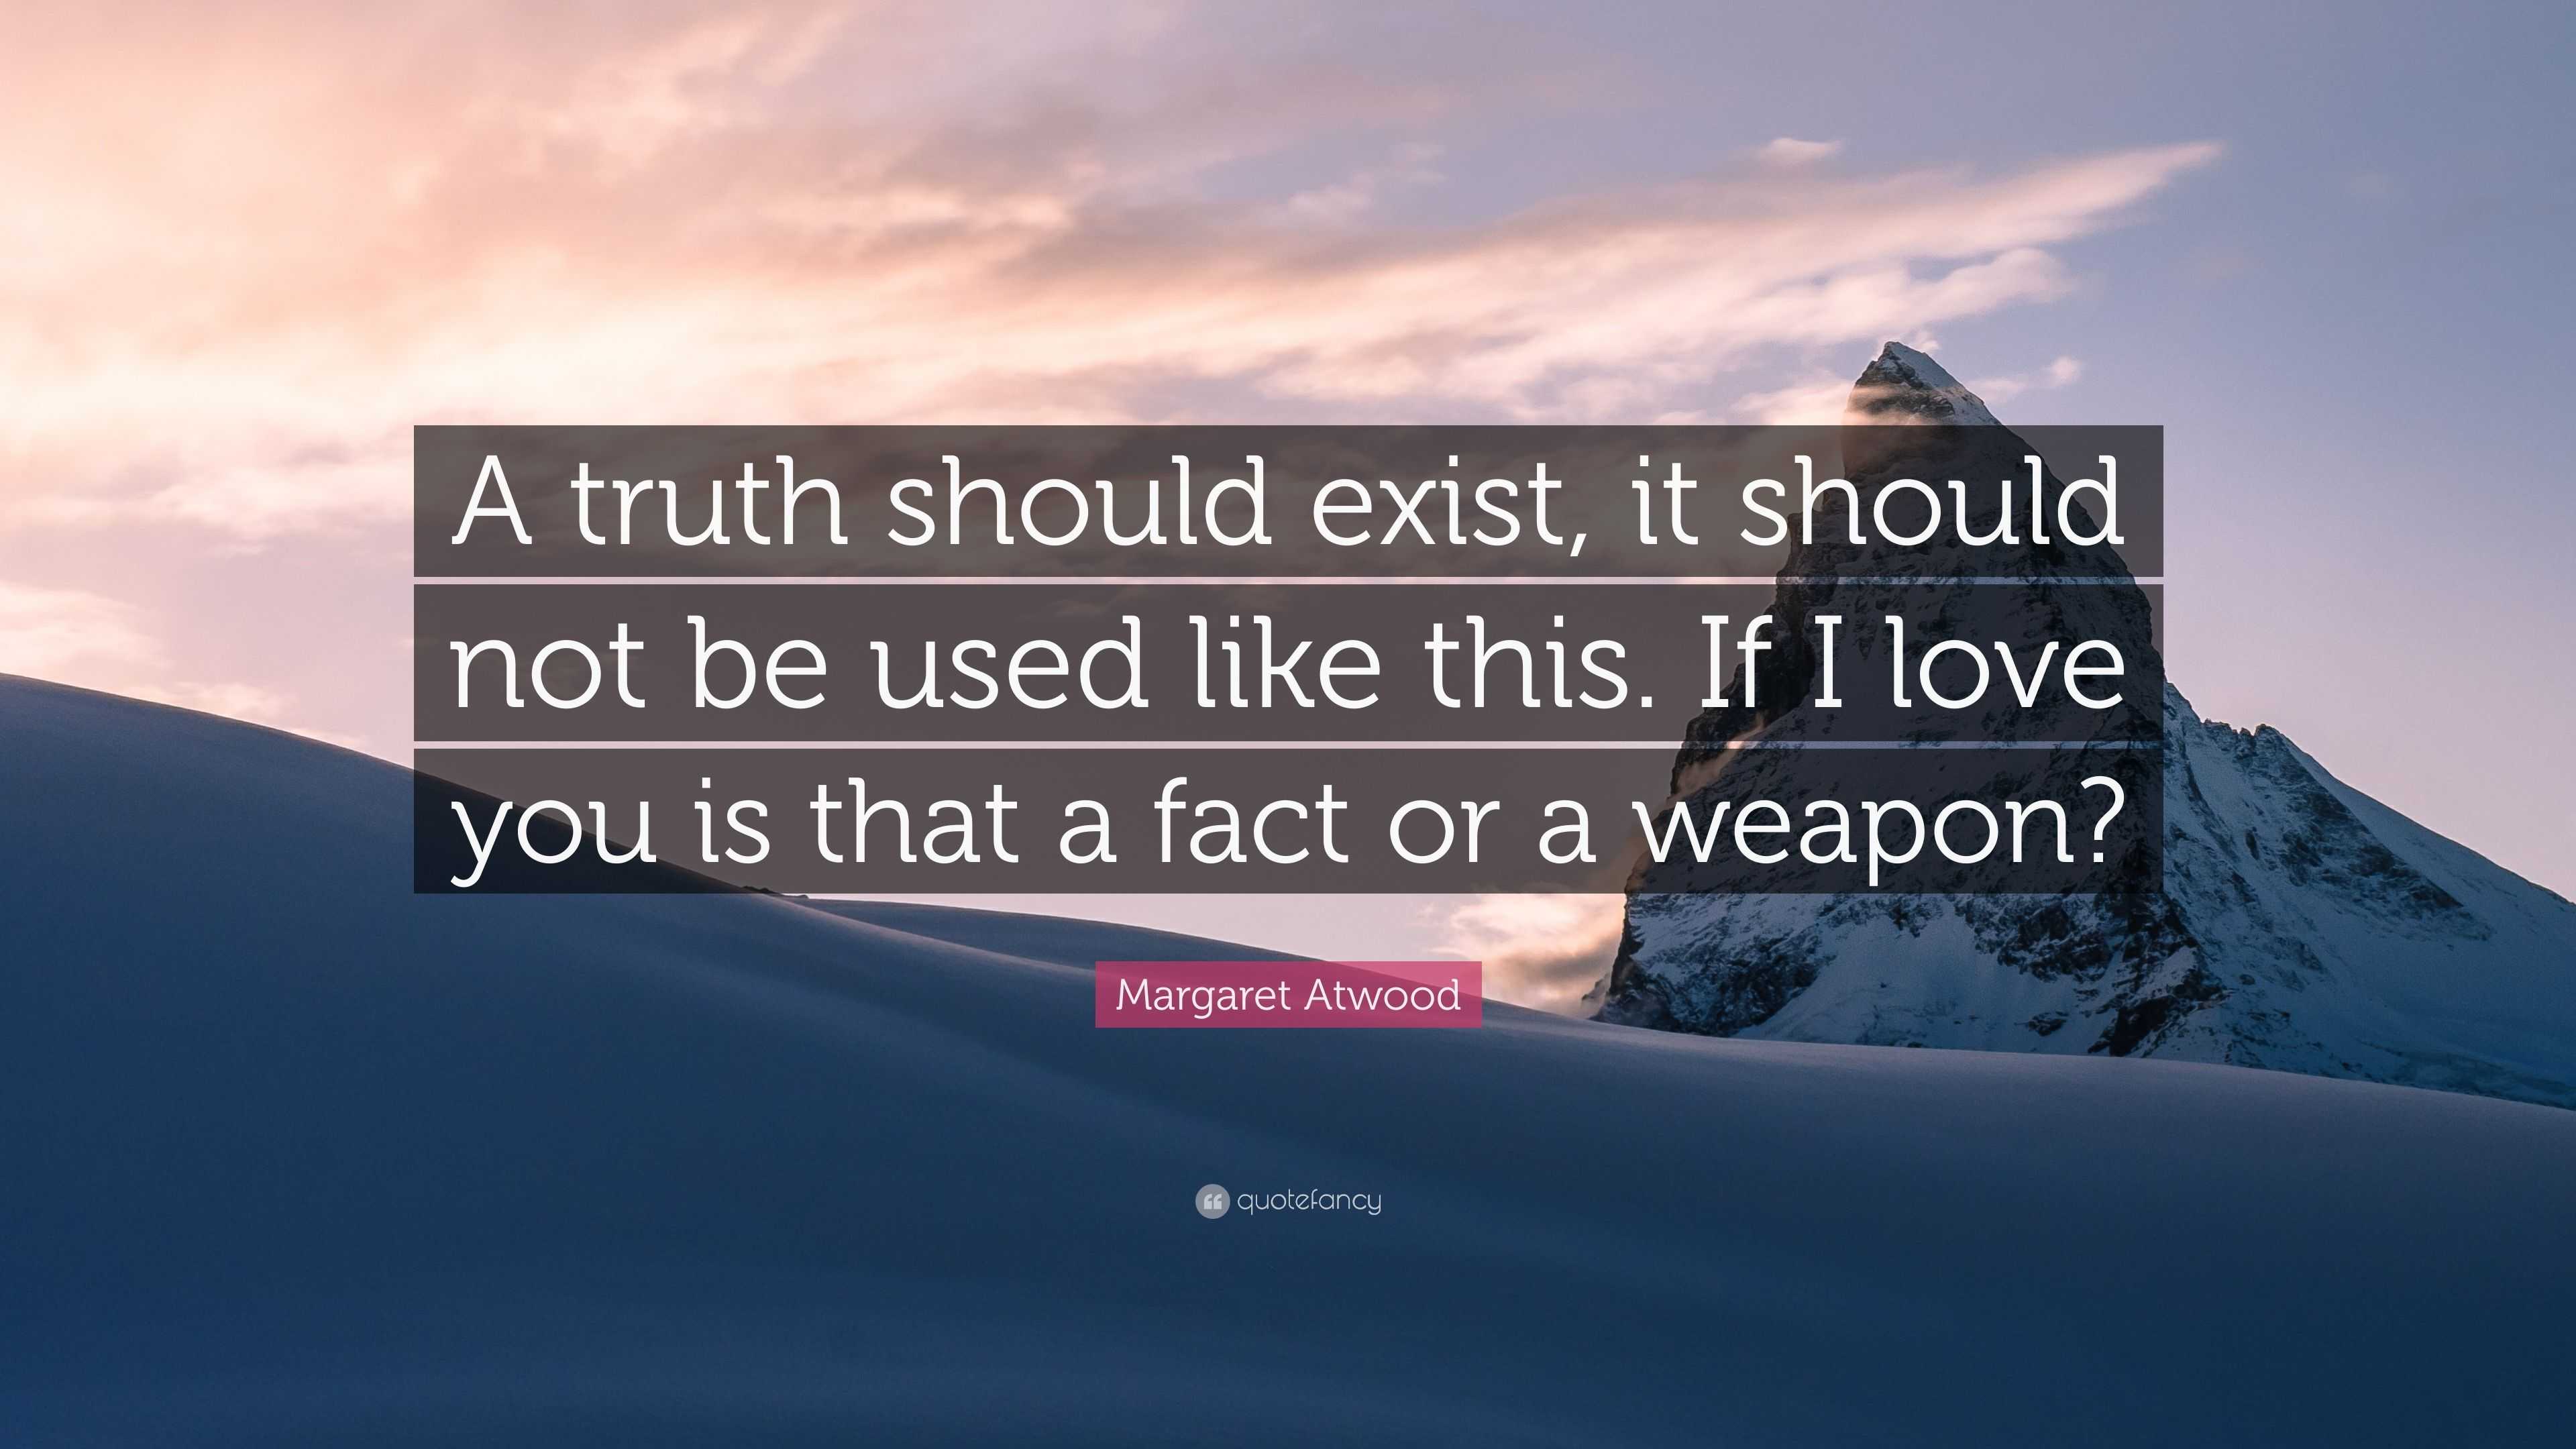 Margaret Atwood Quote: "A truth should exist, it should not be used like this. If I love you is ...